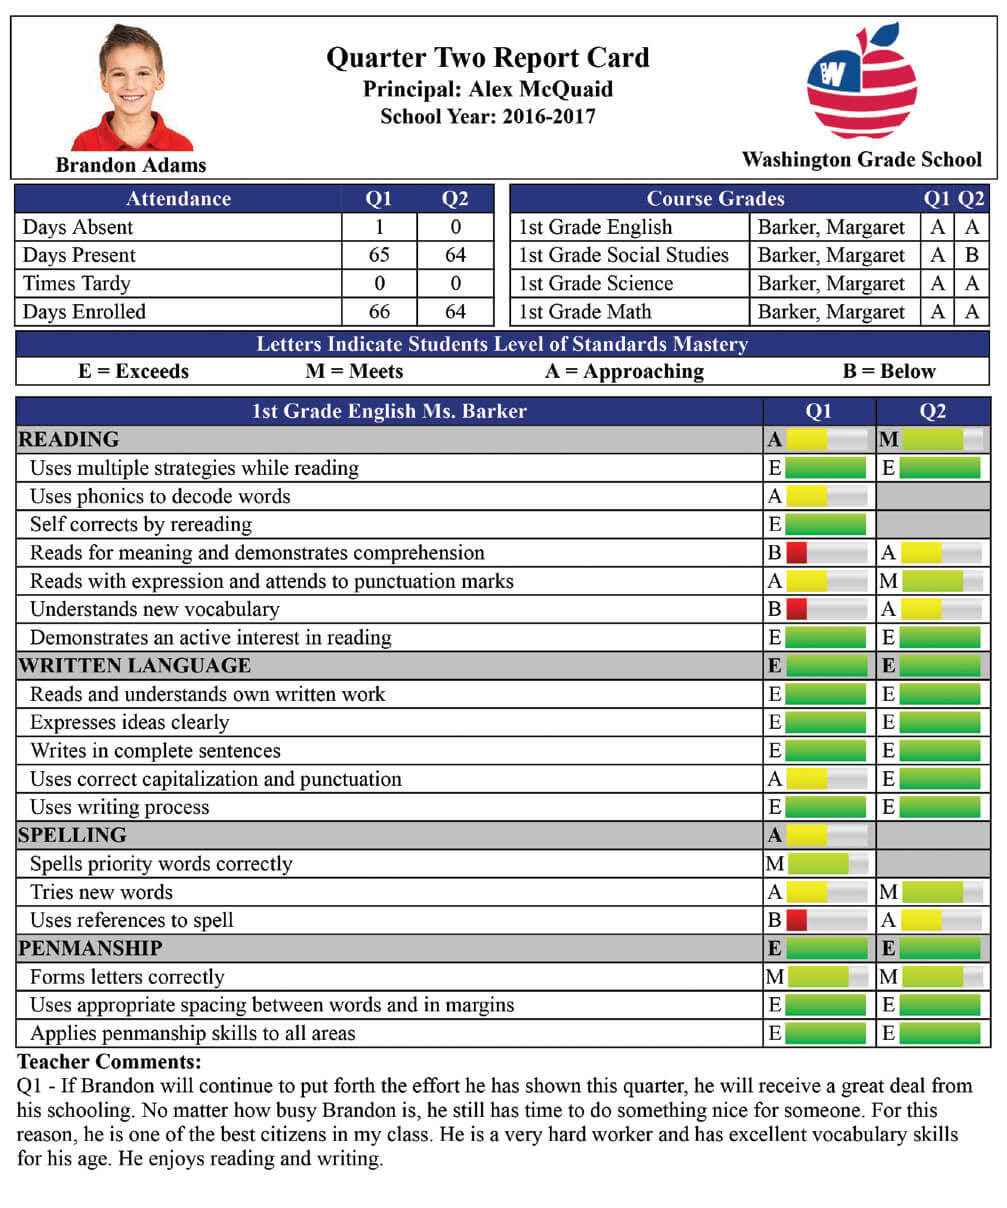 Report Card Creator Plugin For Powerschool Sis - From Mba Pertaining To Powerschool Reports Templates